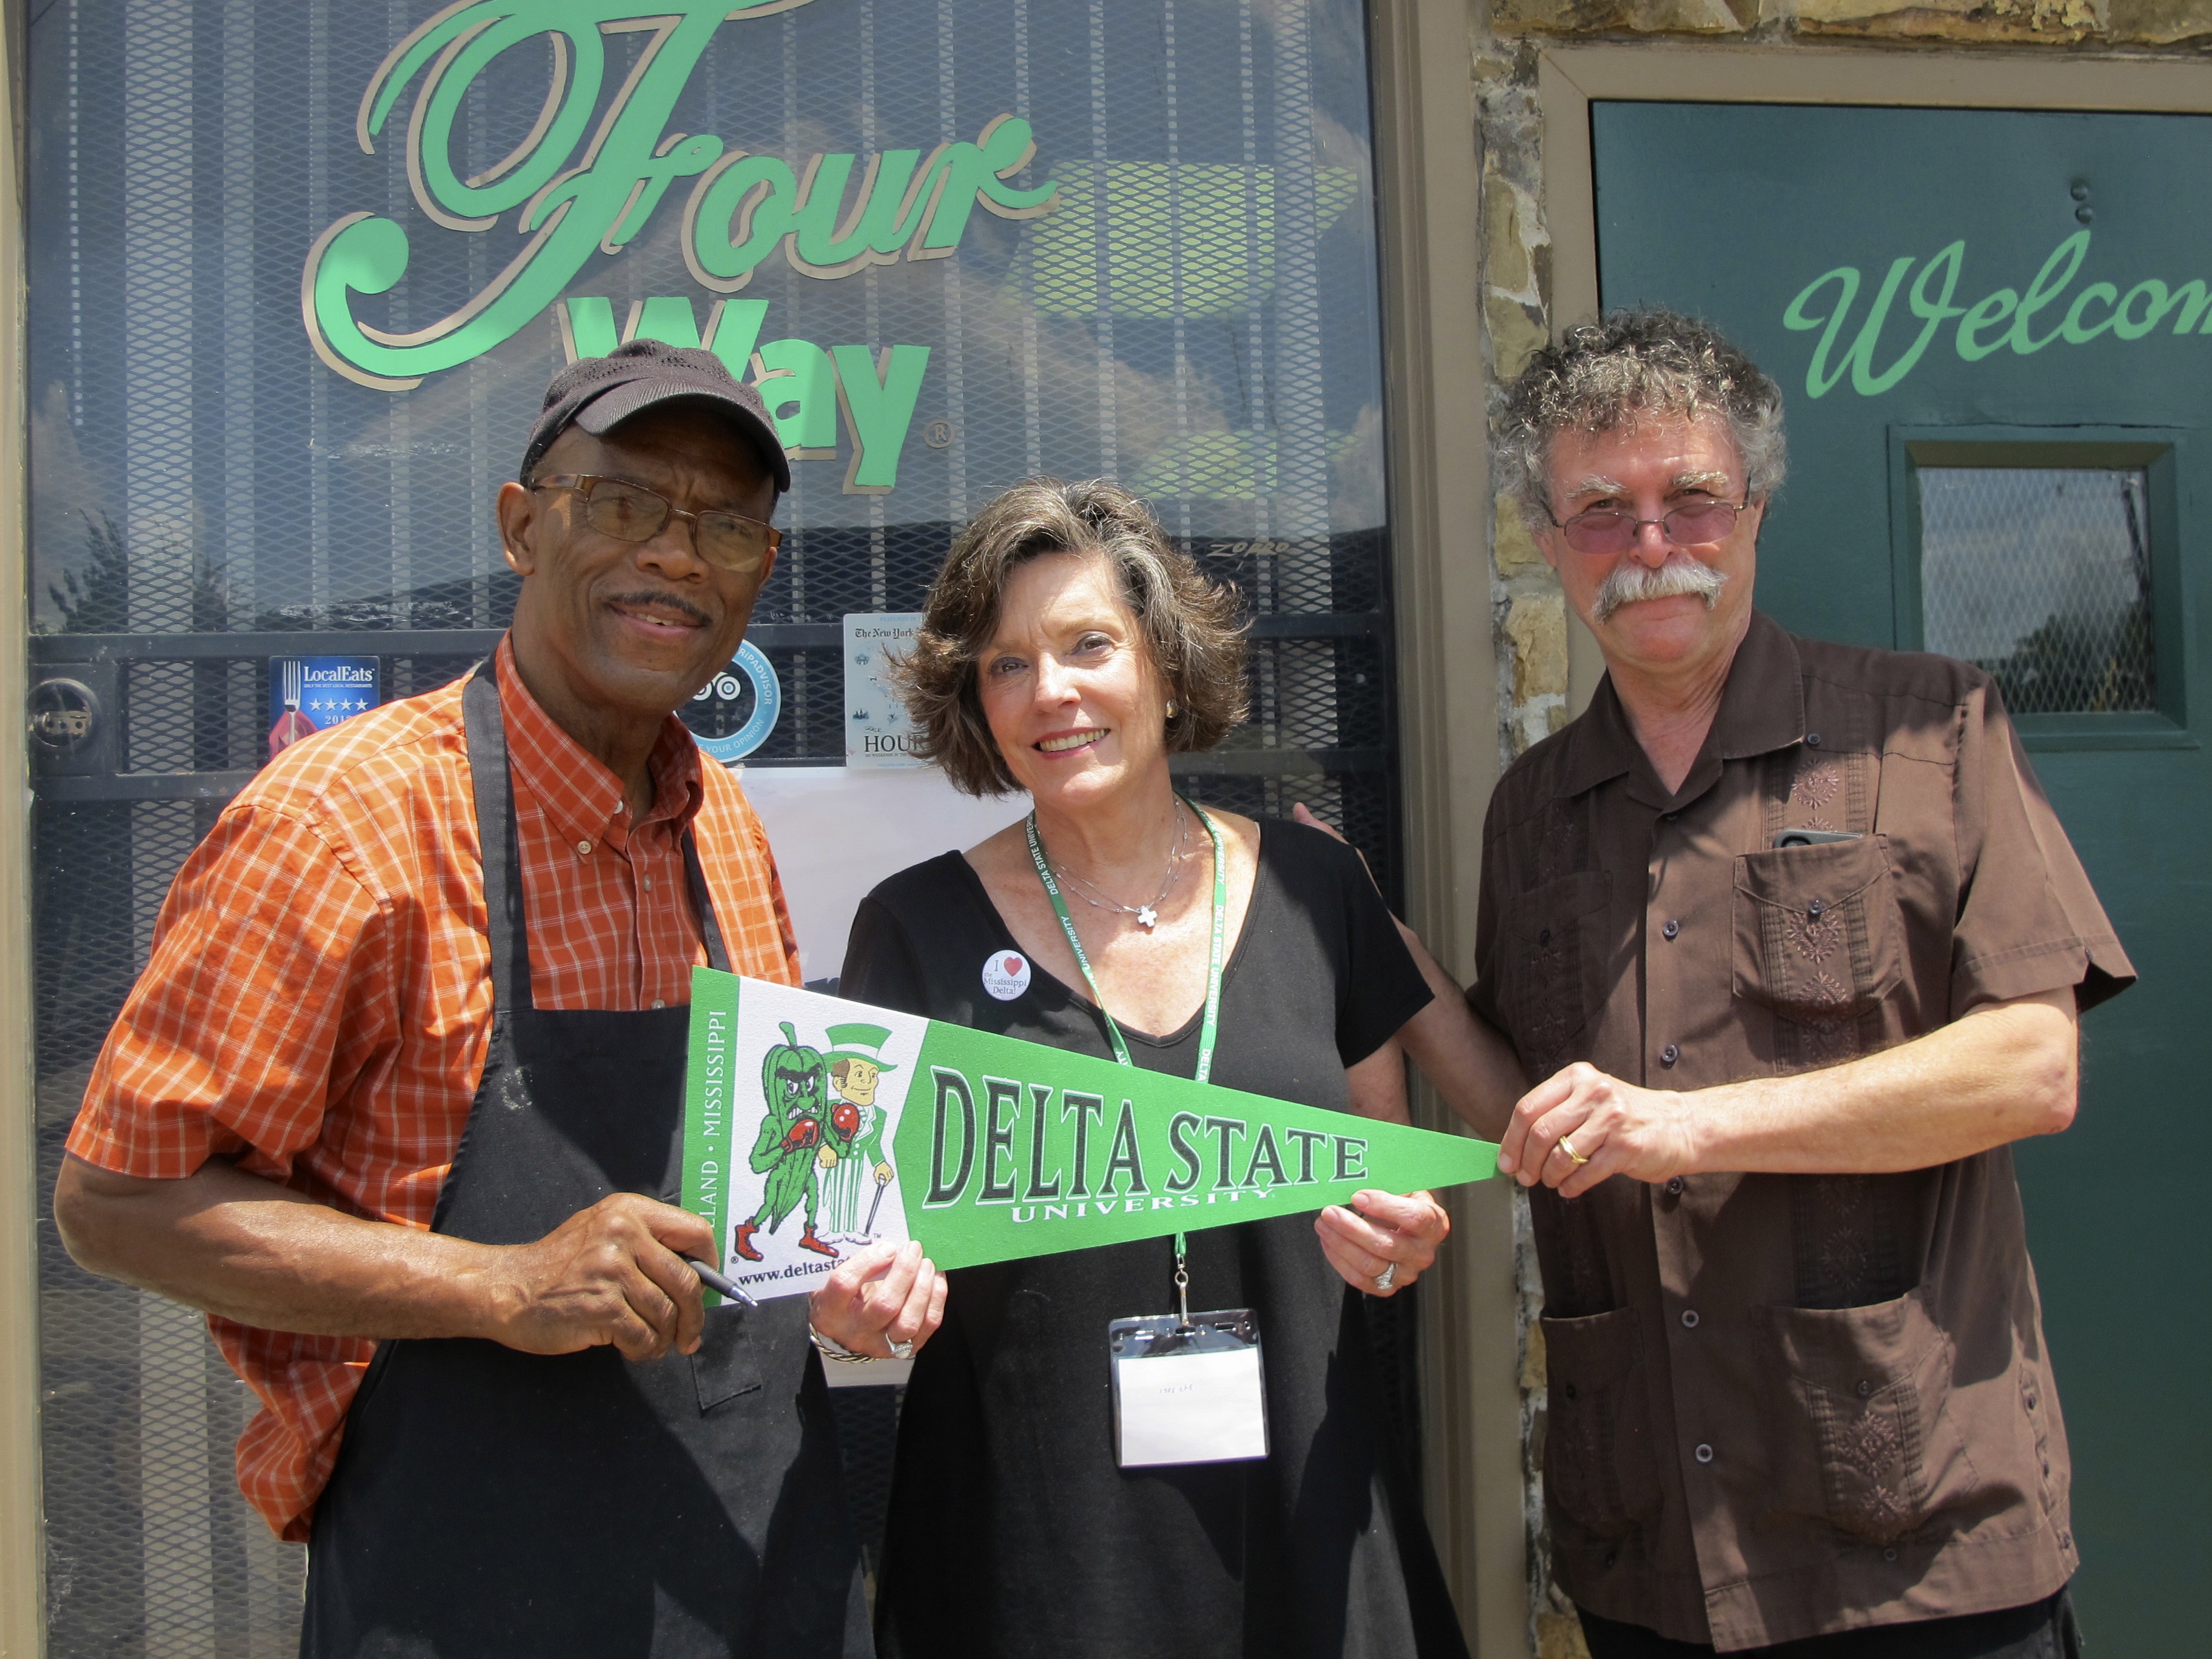 Photo: Restaurateur Willie Bates and the Delta Center’s Lee Aylward and Luther Brown in front of the Four Way Grill, 998 Mississippi Blvd, Memphis, TN 38126.  Photo by Rachel Anderson.